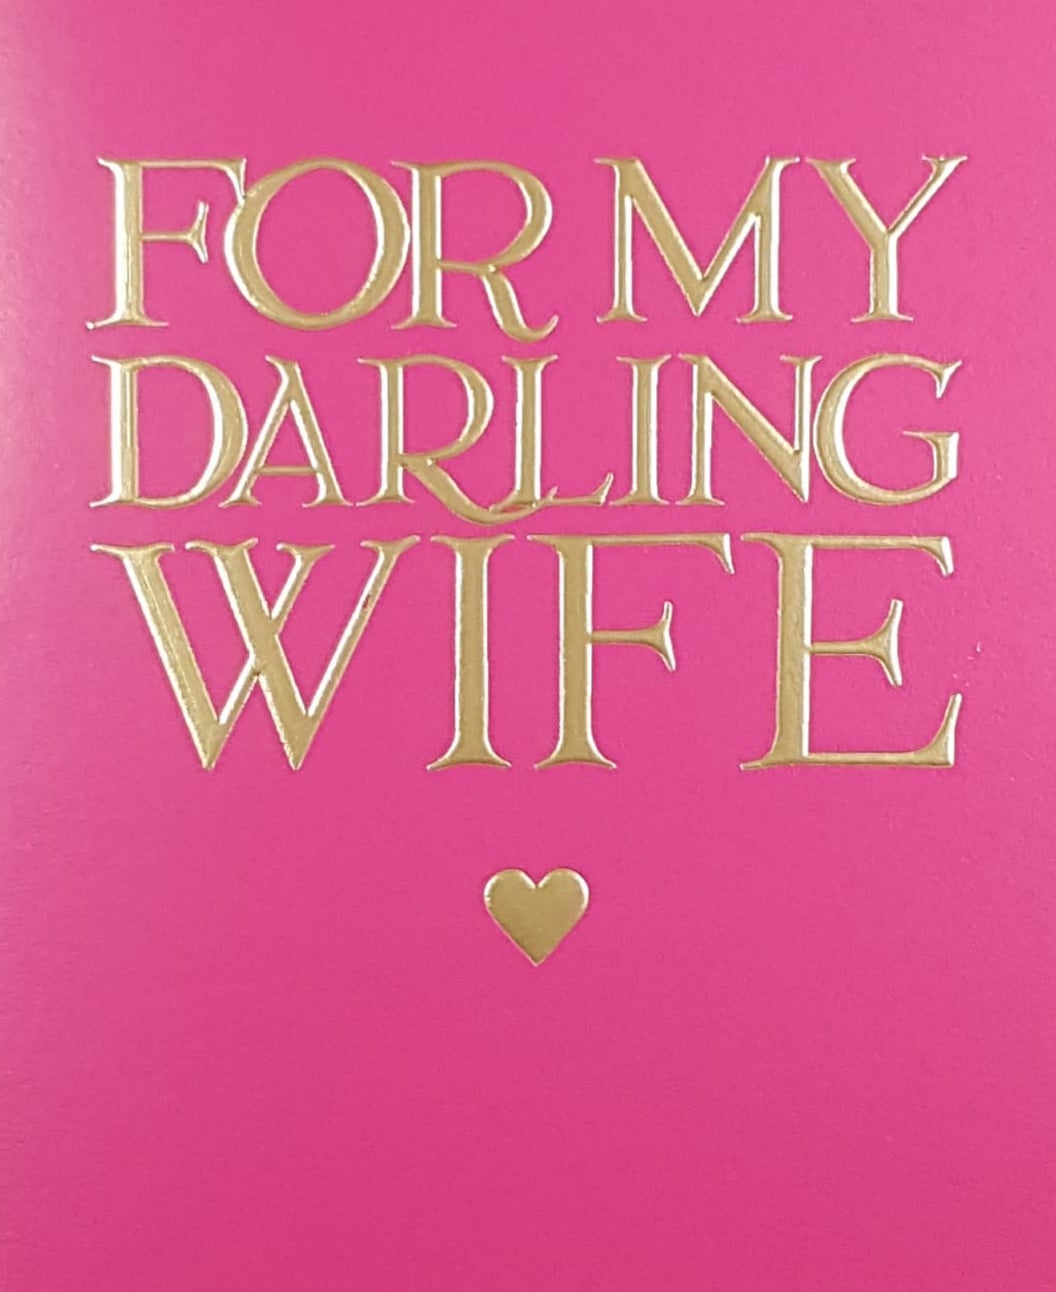 Anniversary Card - Wife / A Gold Font On A Pink Background